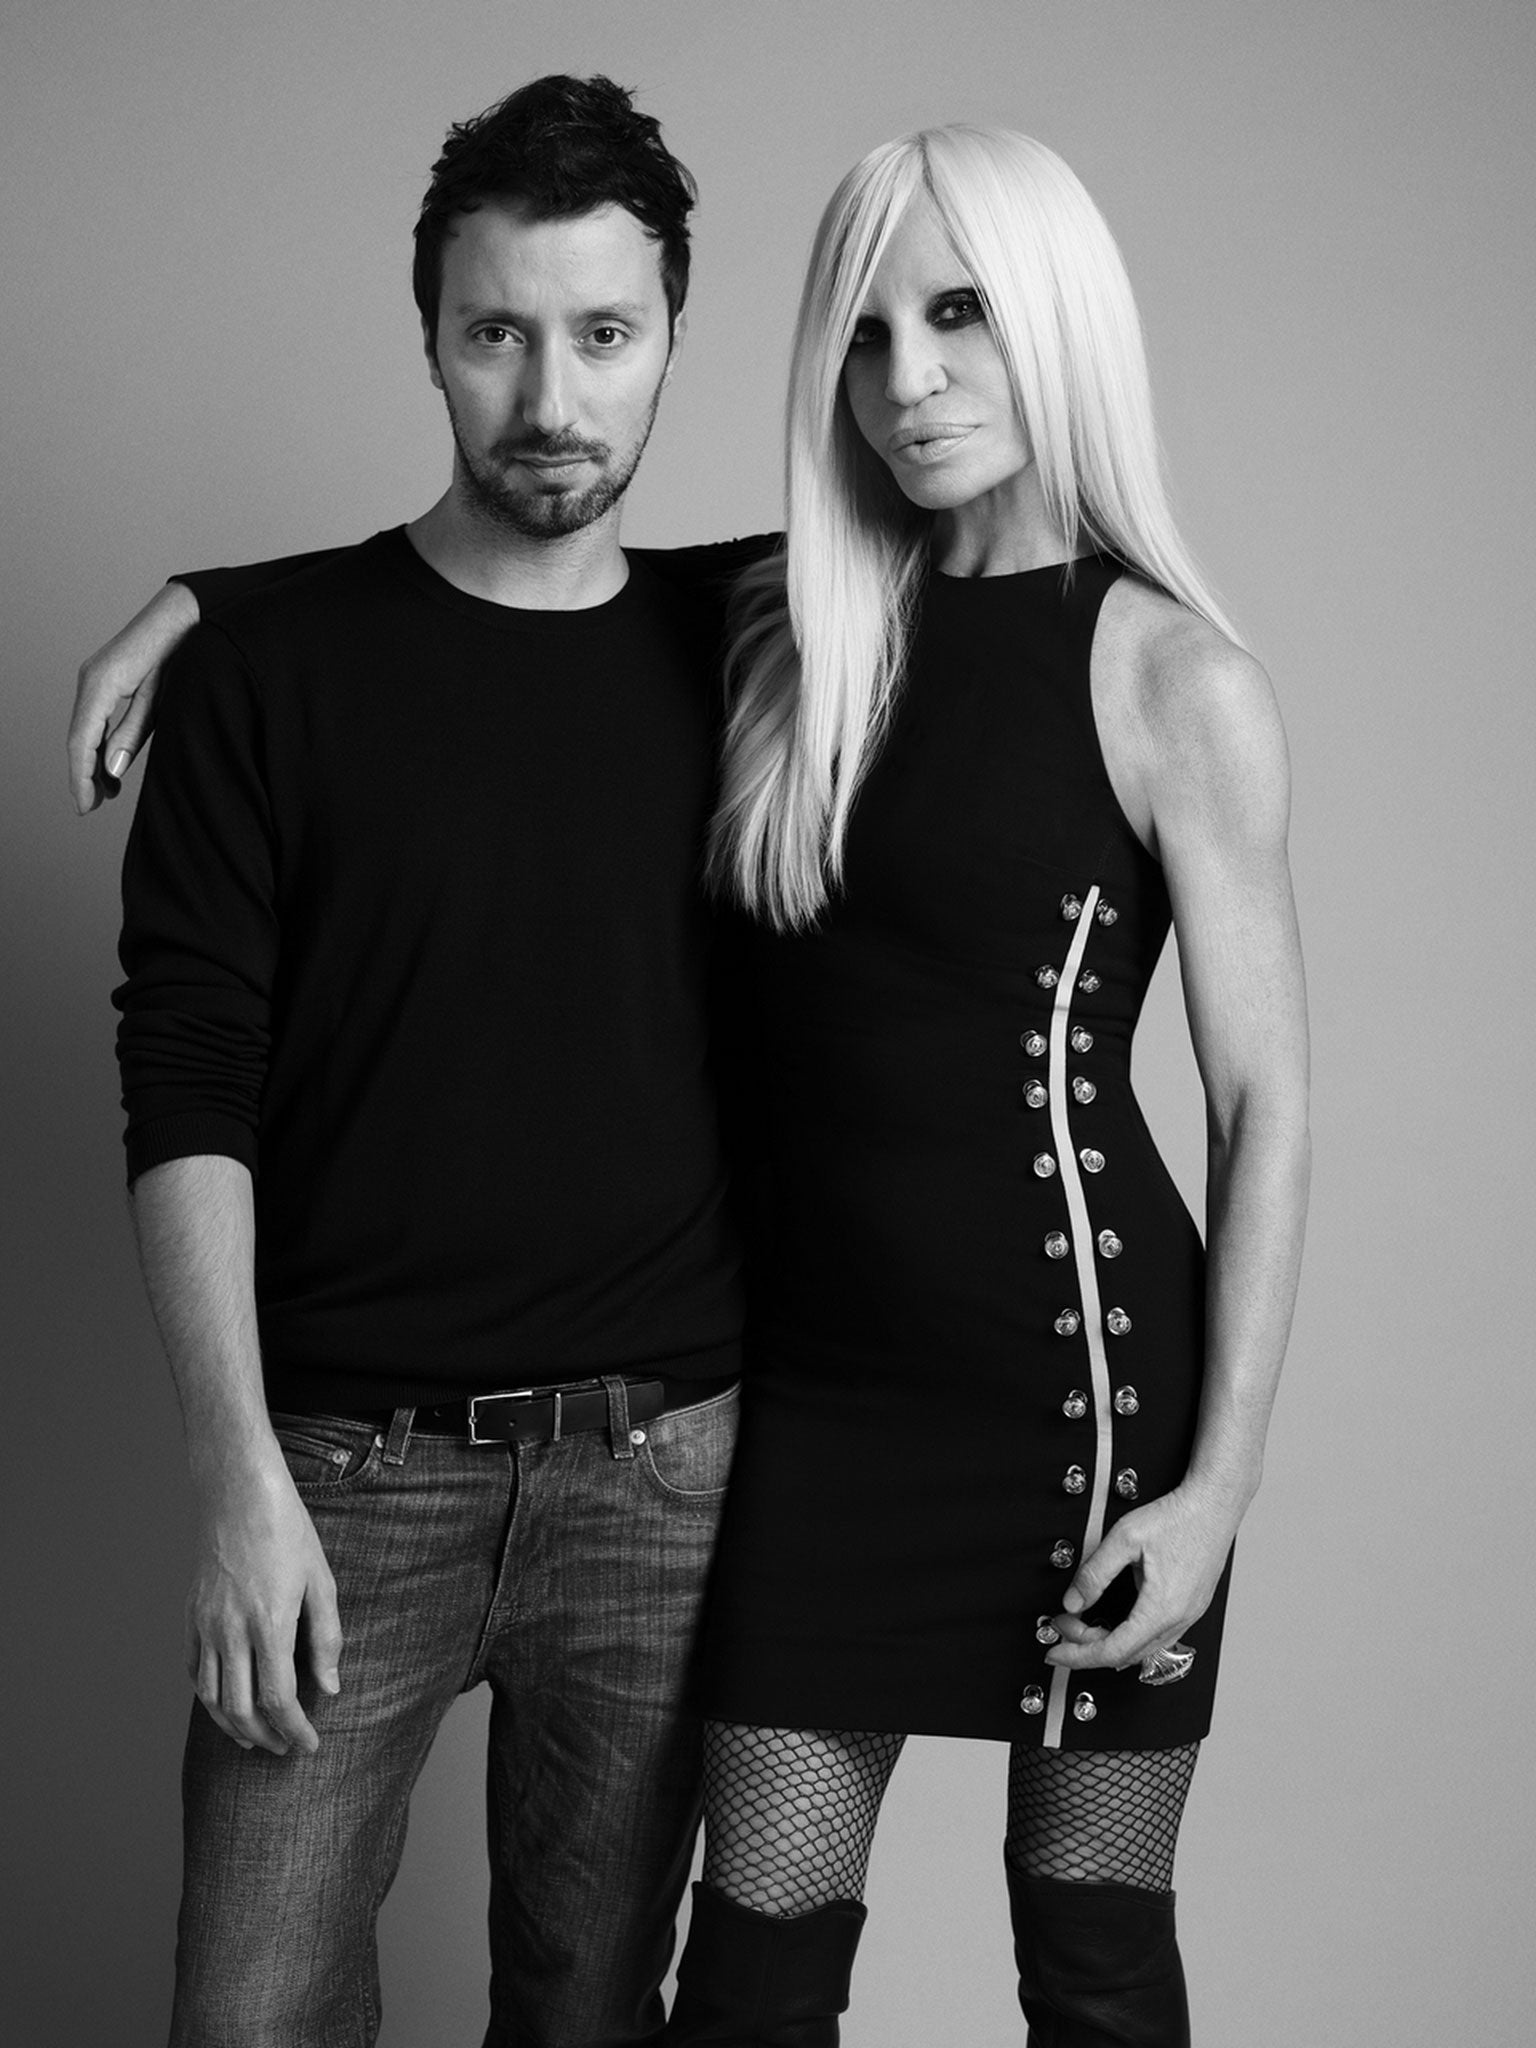 Anthony Vaccarello and Donatella Versace as he's appointed creative director of Versus